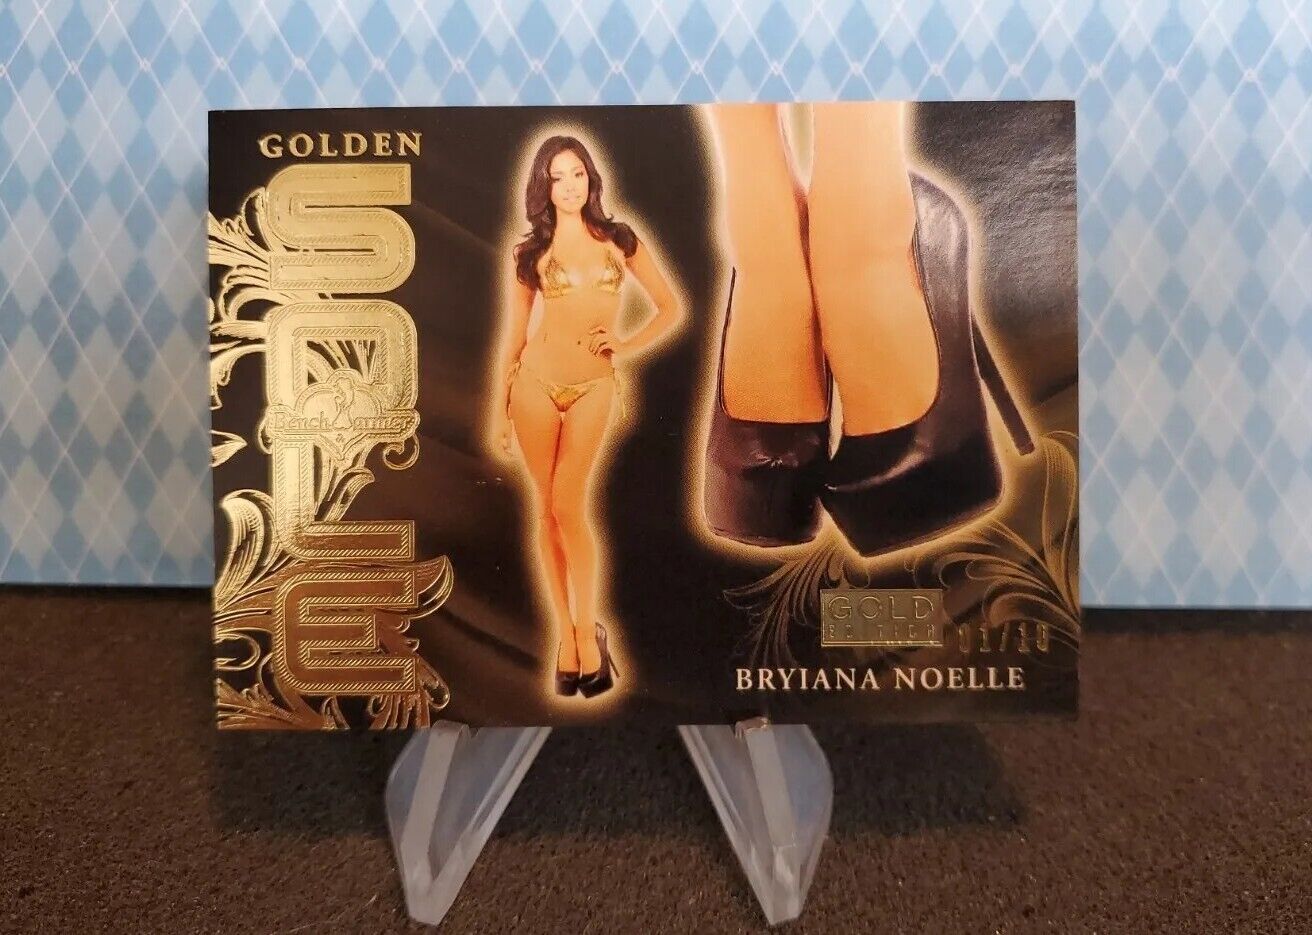 2021 Benchwarmer Gold Edition Bryiana Noelle GOLDEN SOLE Gold Foil #01/10